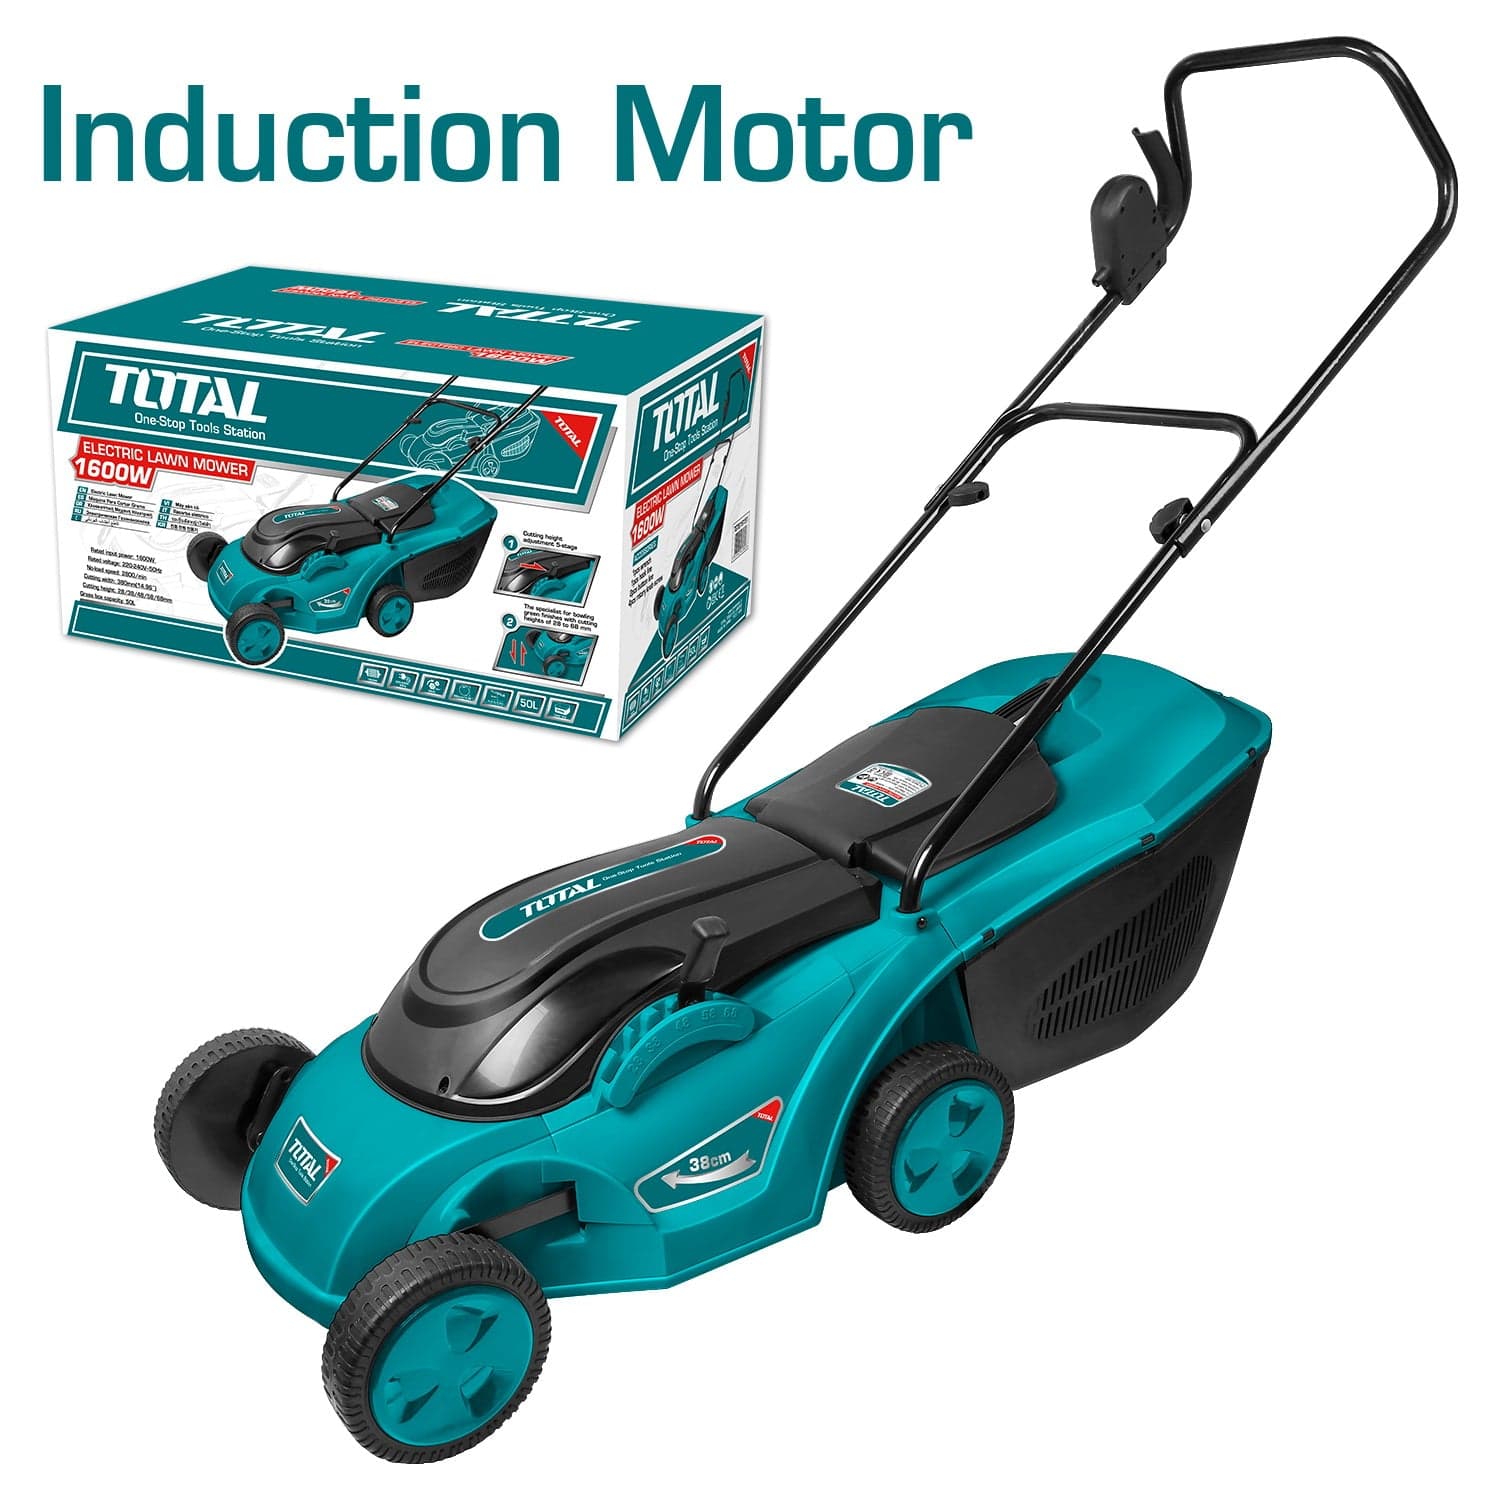 Total Gasoline Lawn Mower 4.8HP 196cc 60L - TGT196201 | Supply Master | Accra, Ghana Tools Buy Tools hardware Building materials